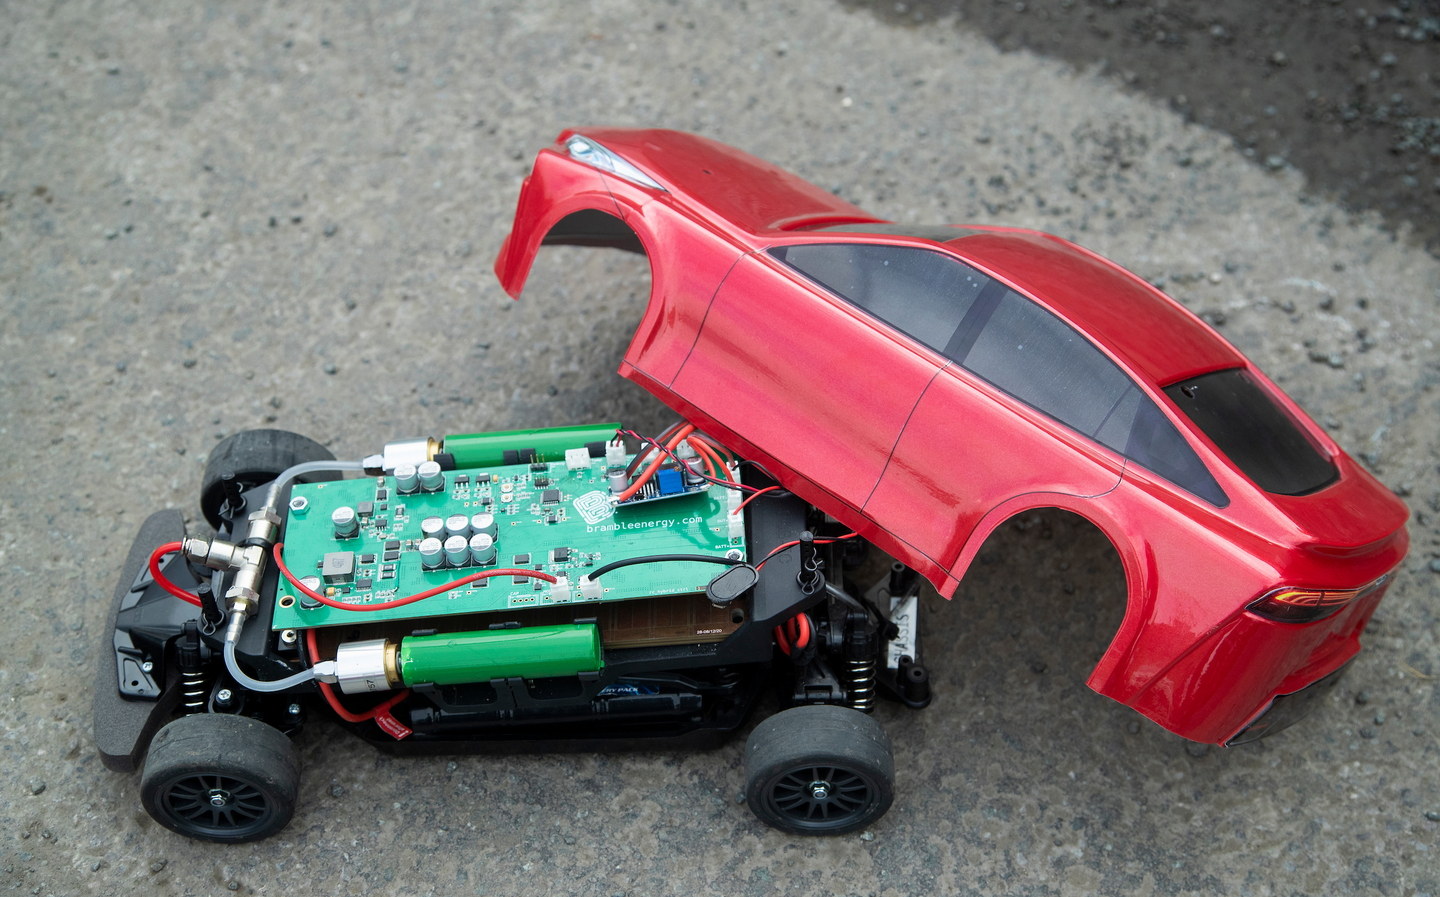 Toyota Mirai fuel-cell powered RC car